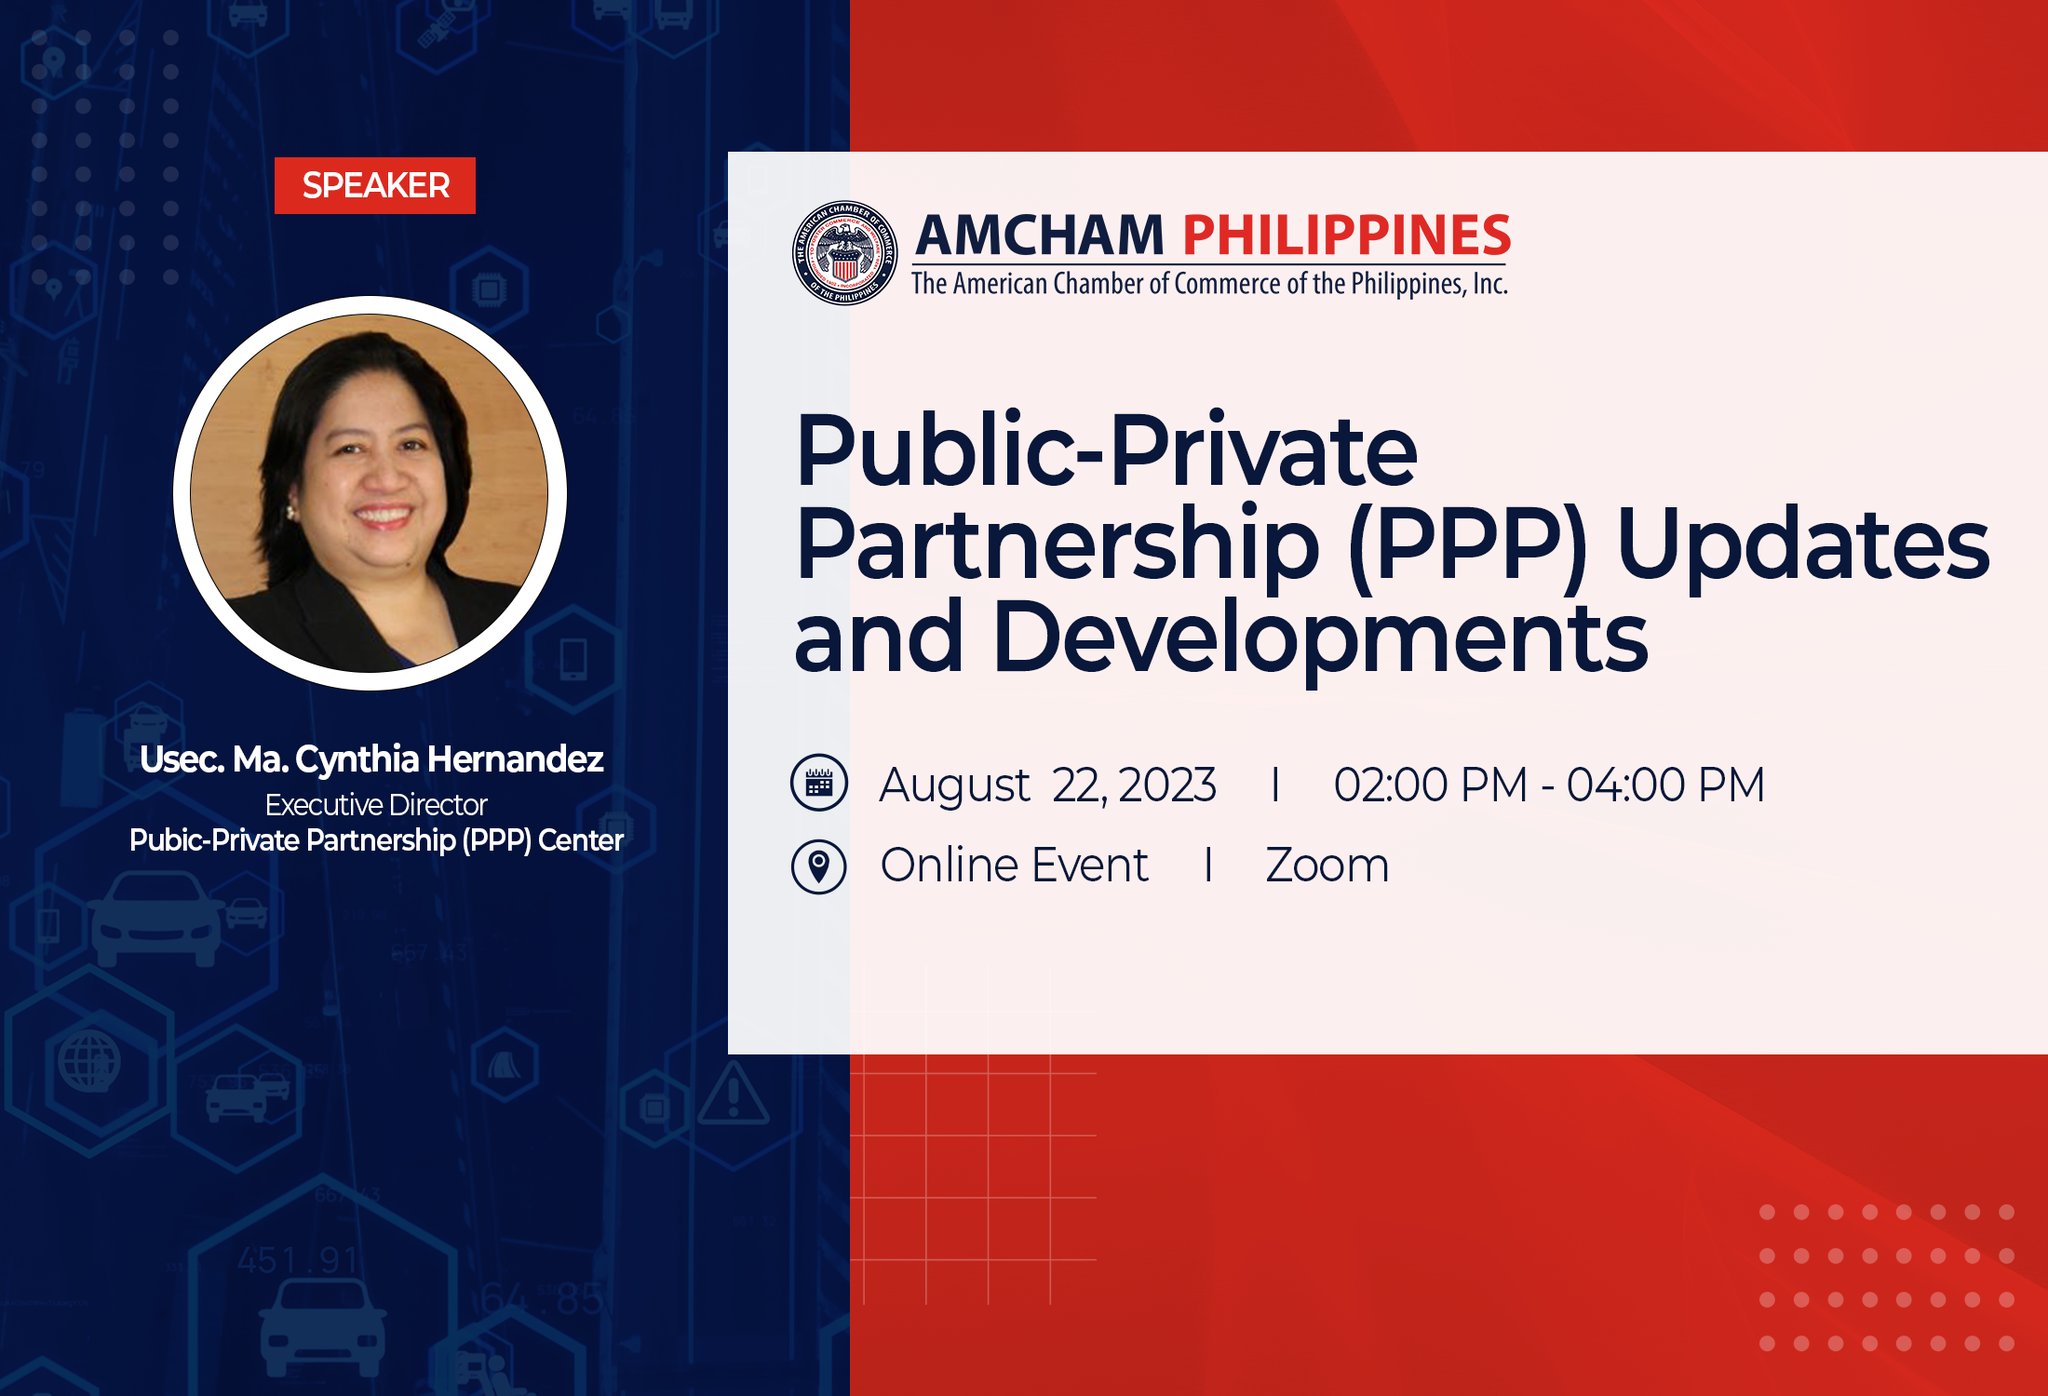 Engr. Rynor G. Jamandre joined AMCHAM's Public-Private Partnership (PPP) Updates and Development Discussion.